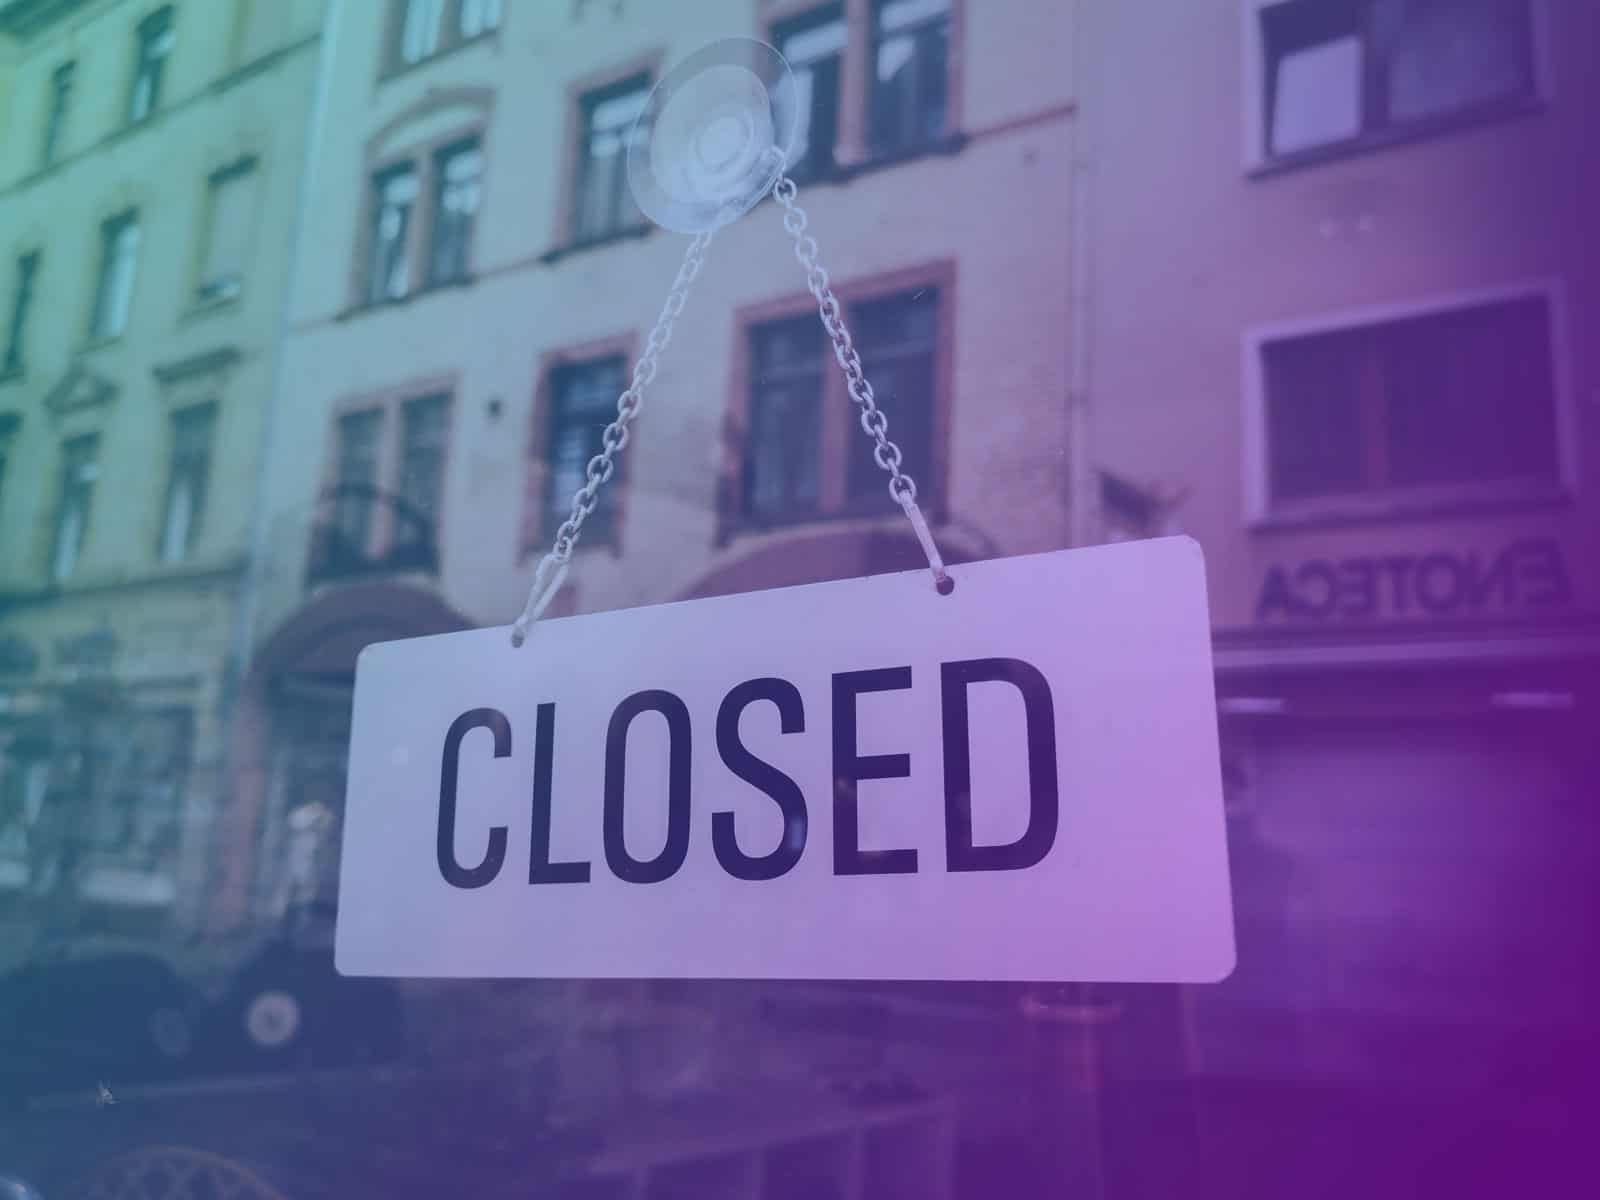 k3 closed for business - picture of a closed sign in shop window